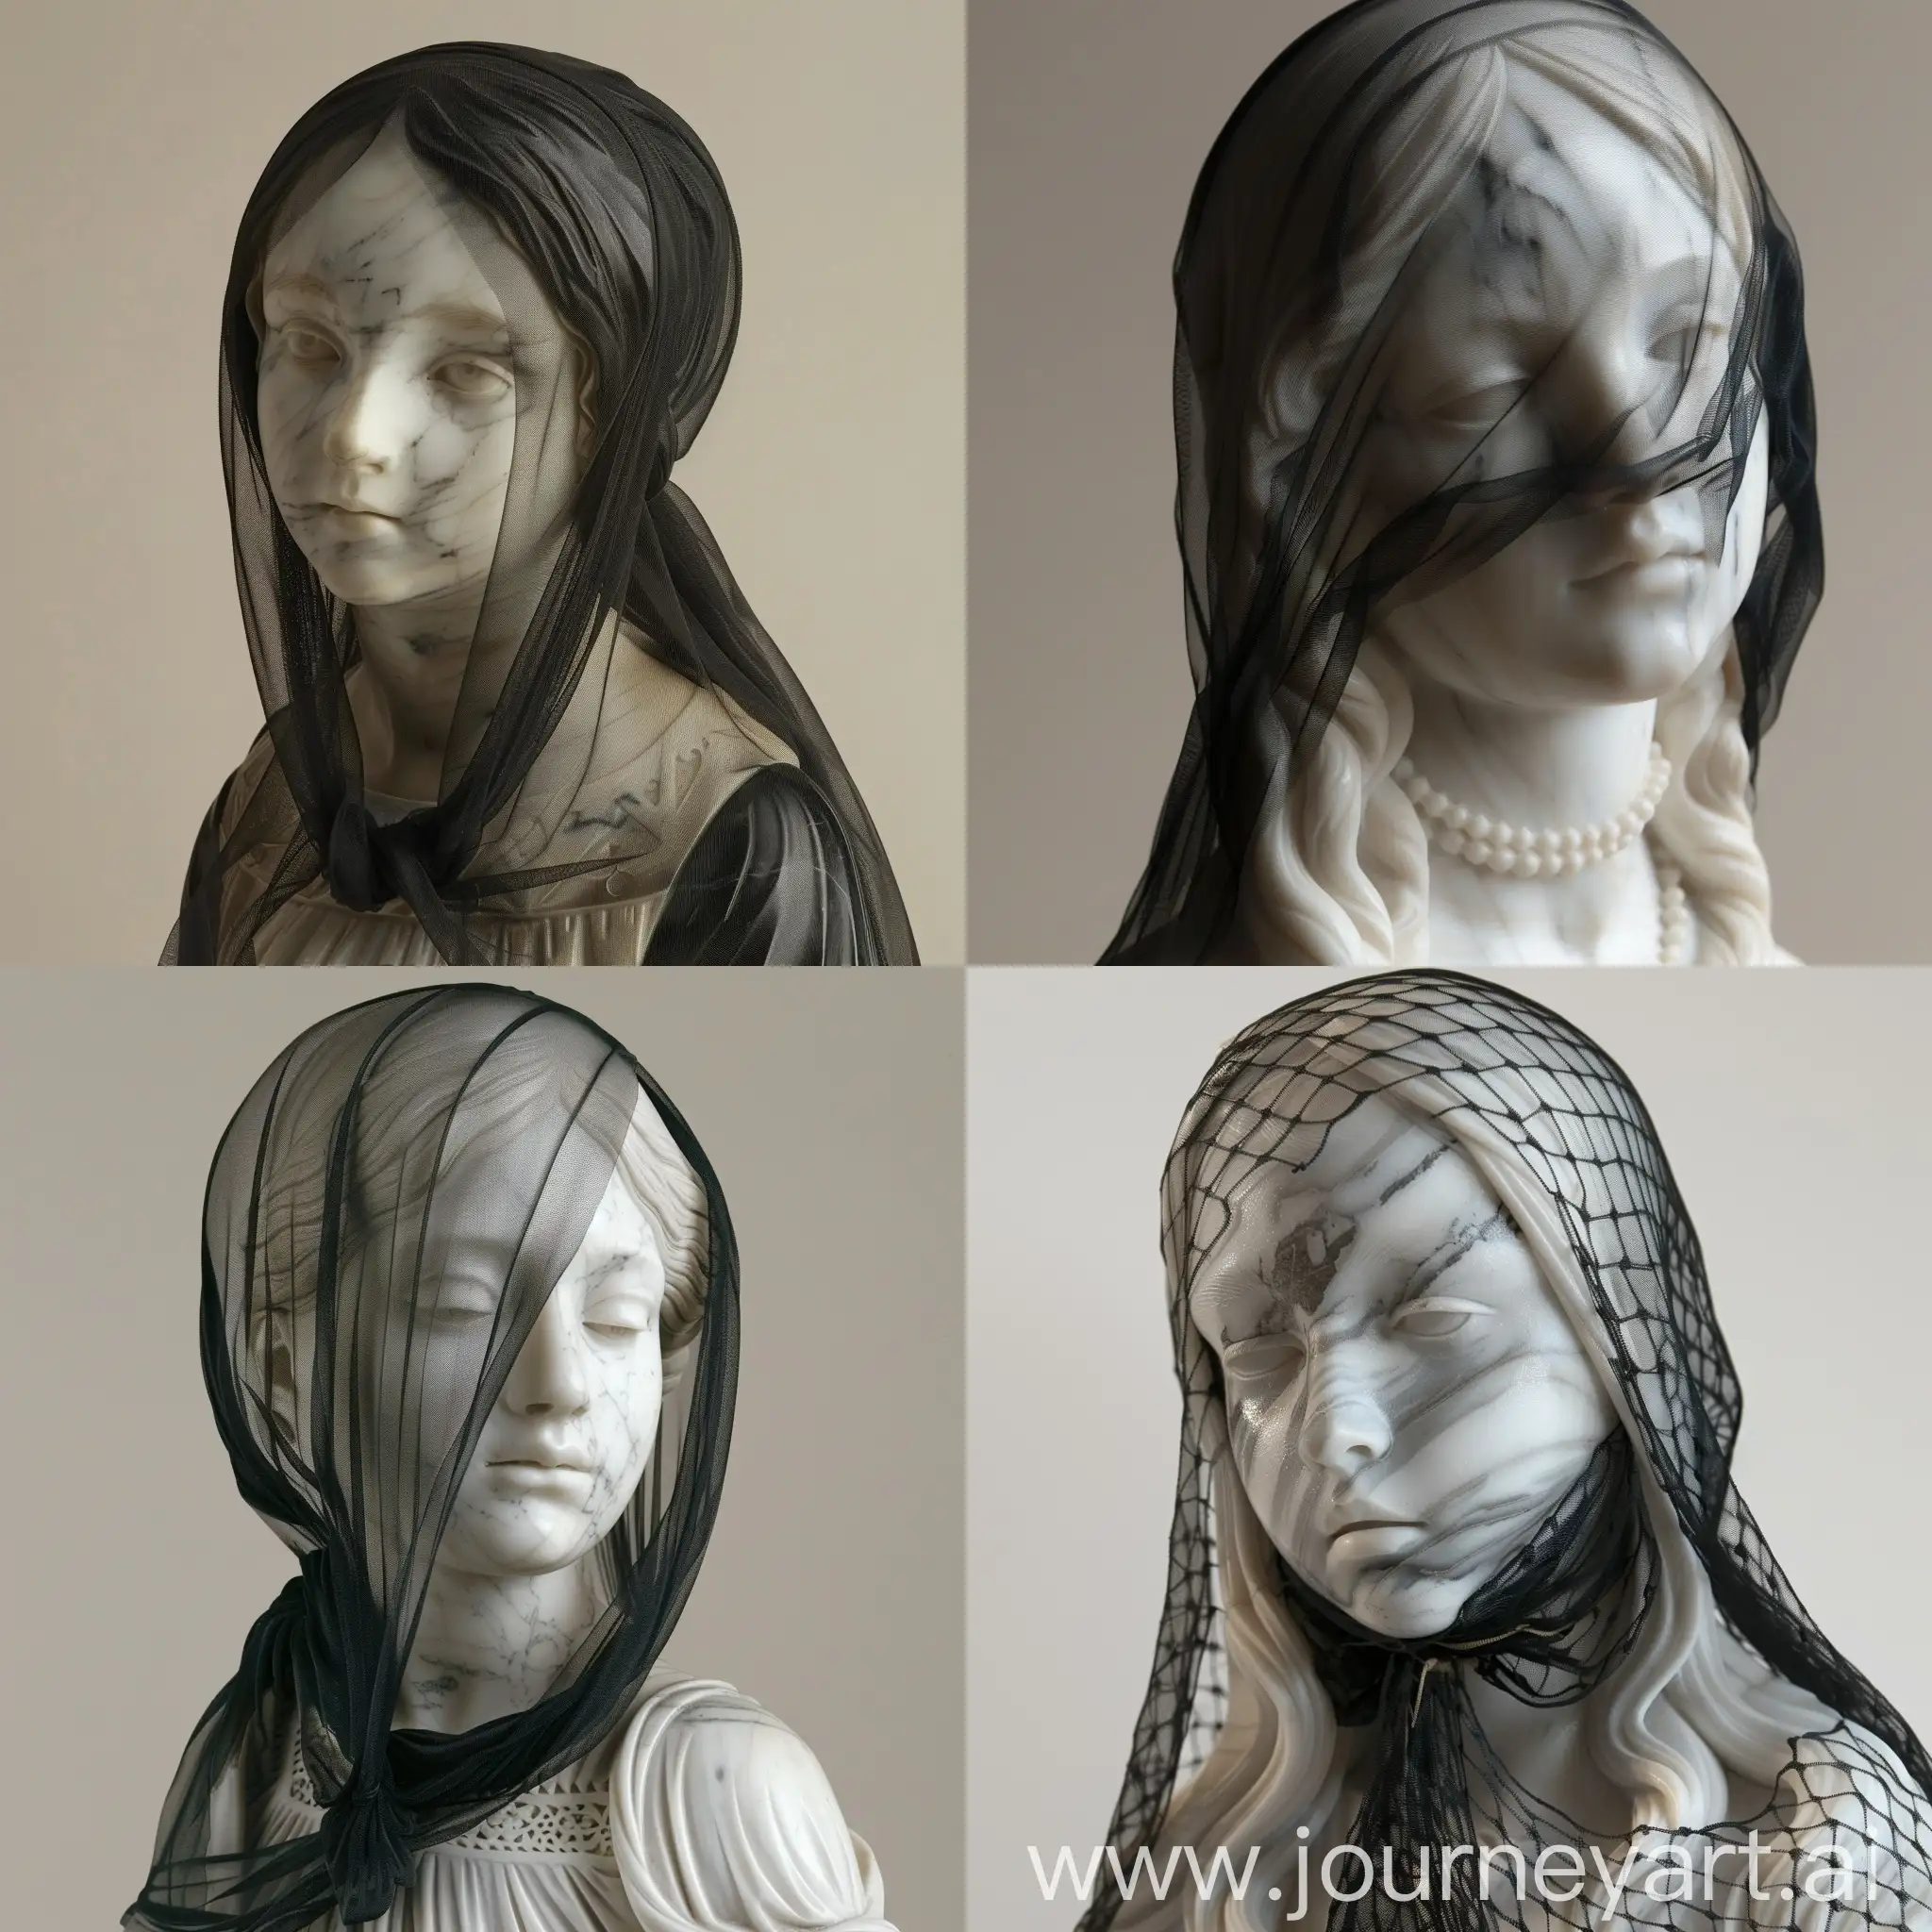 A marble sculpture of a girl ,she has a black veil on her face